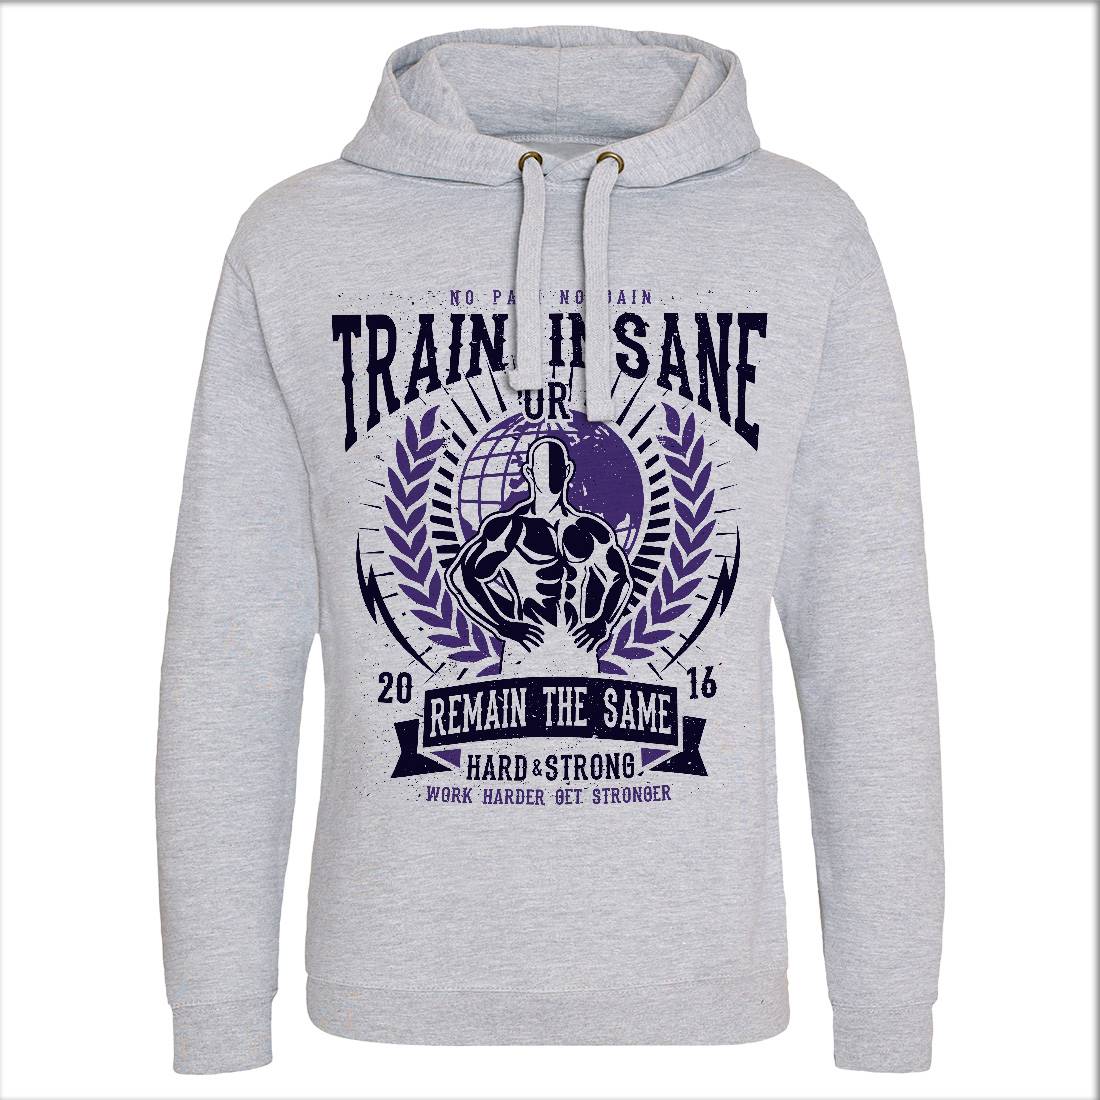 Train Insane Mens Hoodie Without Pocket Gym A183